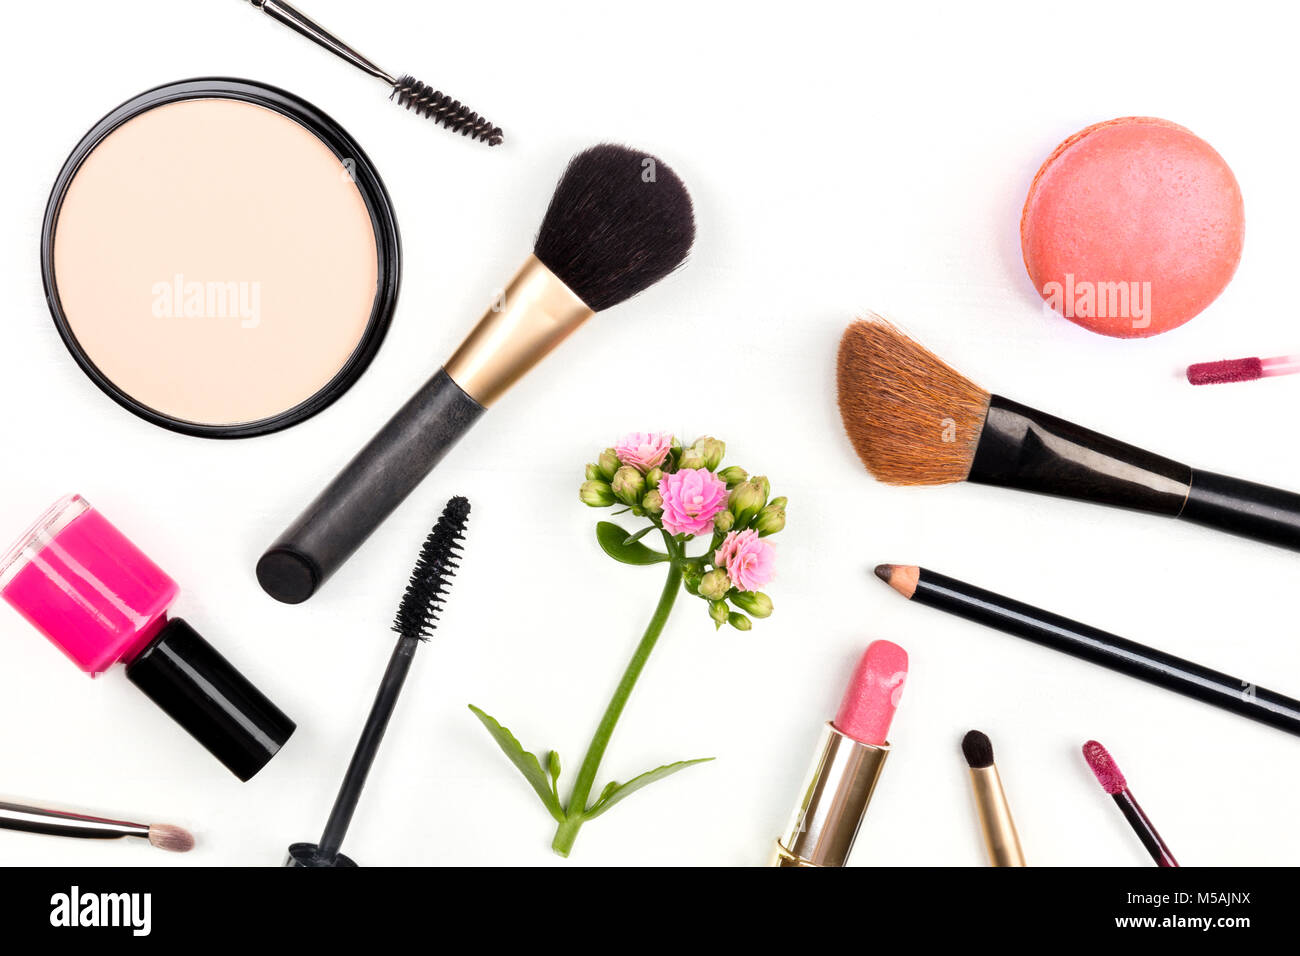 A closeup of makeup brushes, powder, lipstick, and a mascara applicator, shot from above on a white background with a pink flower and a macaroon, with Stock Photo